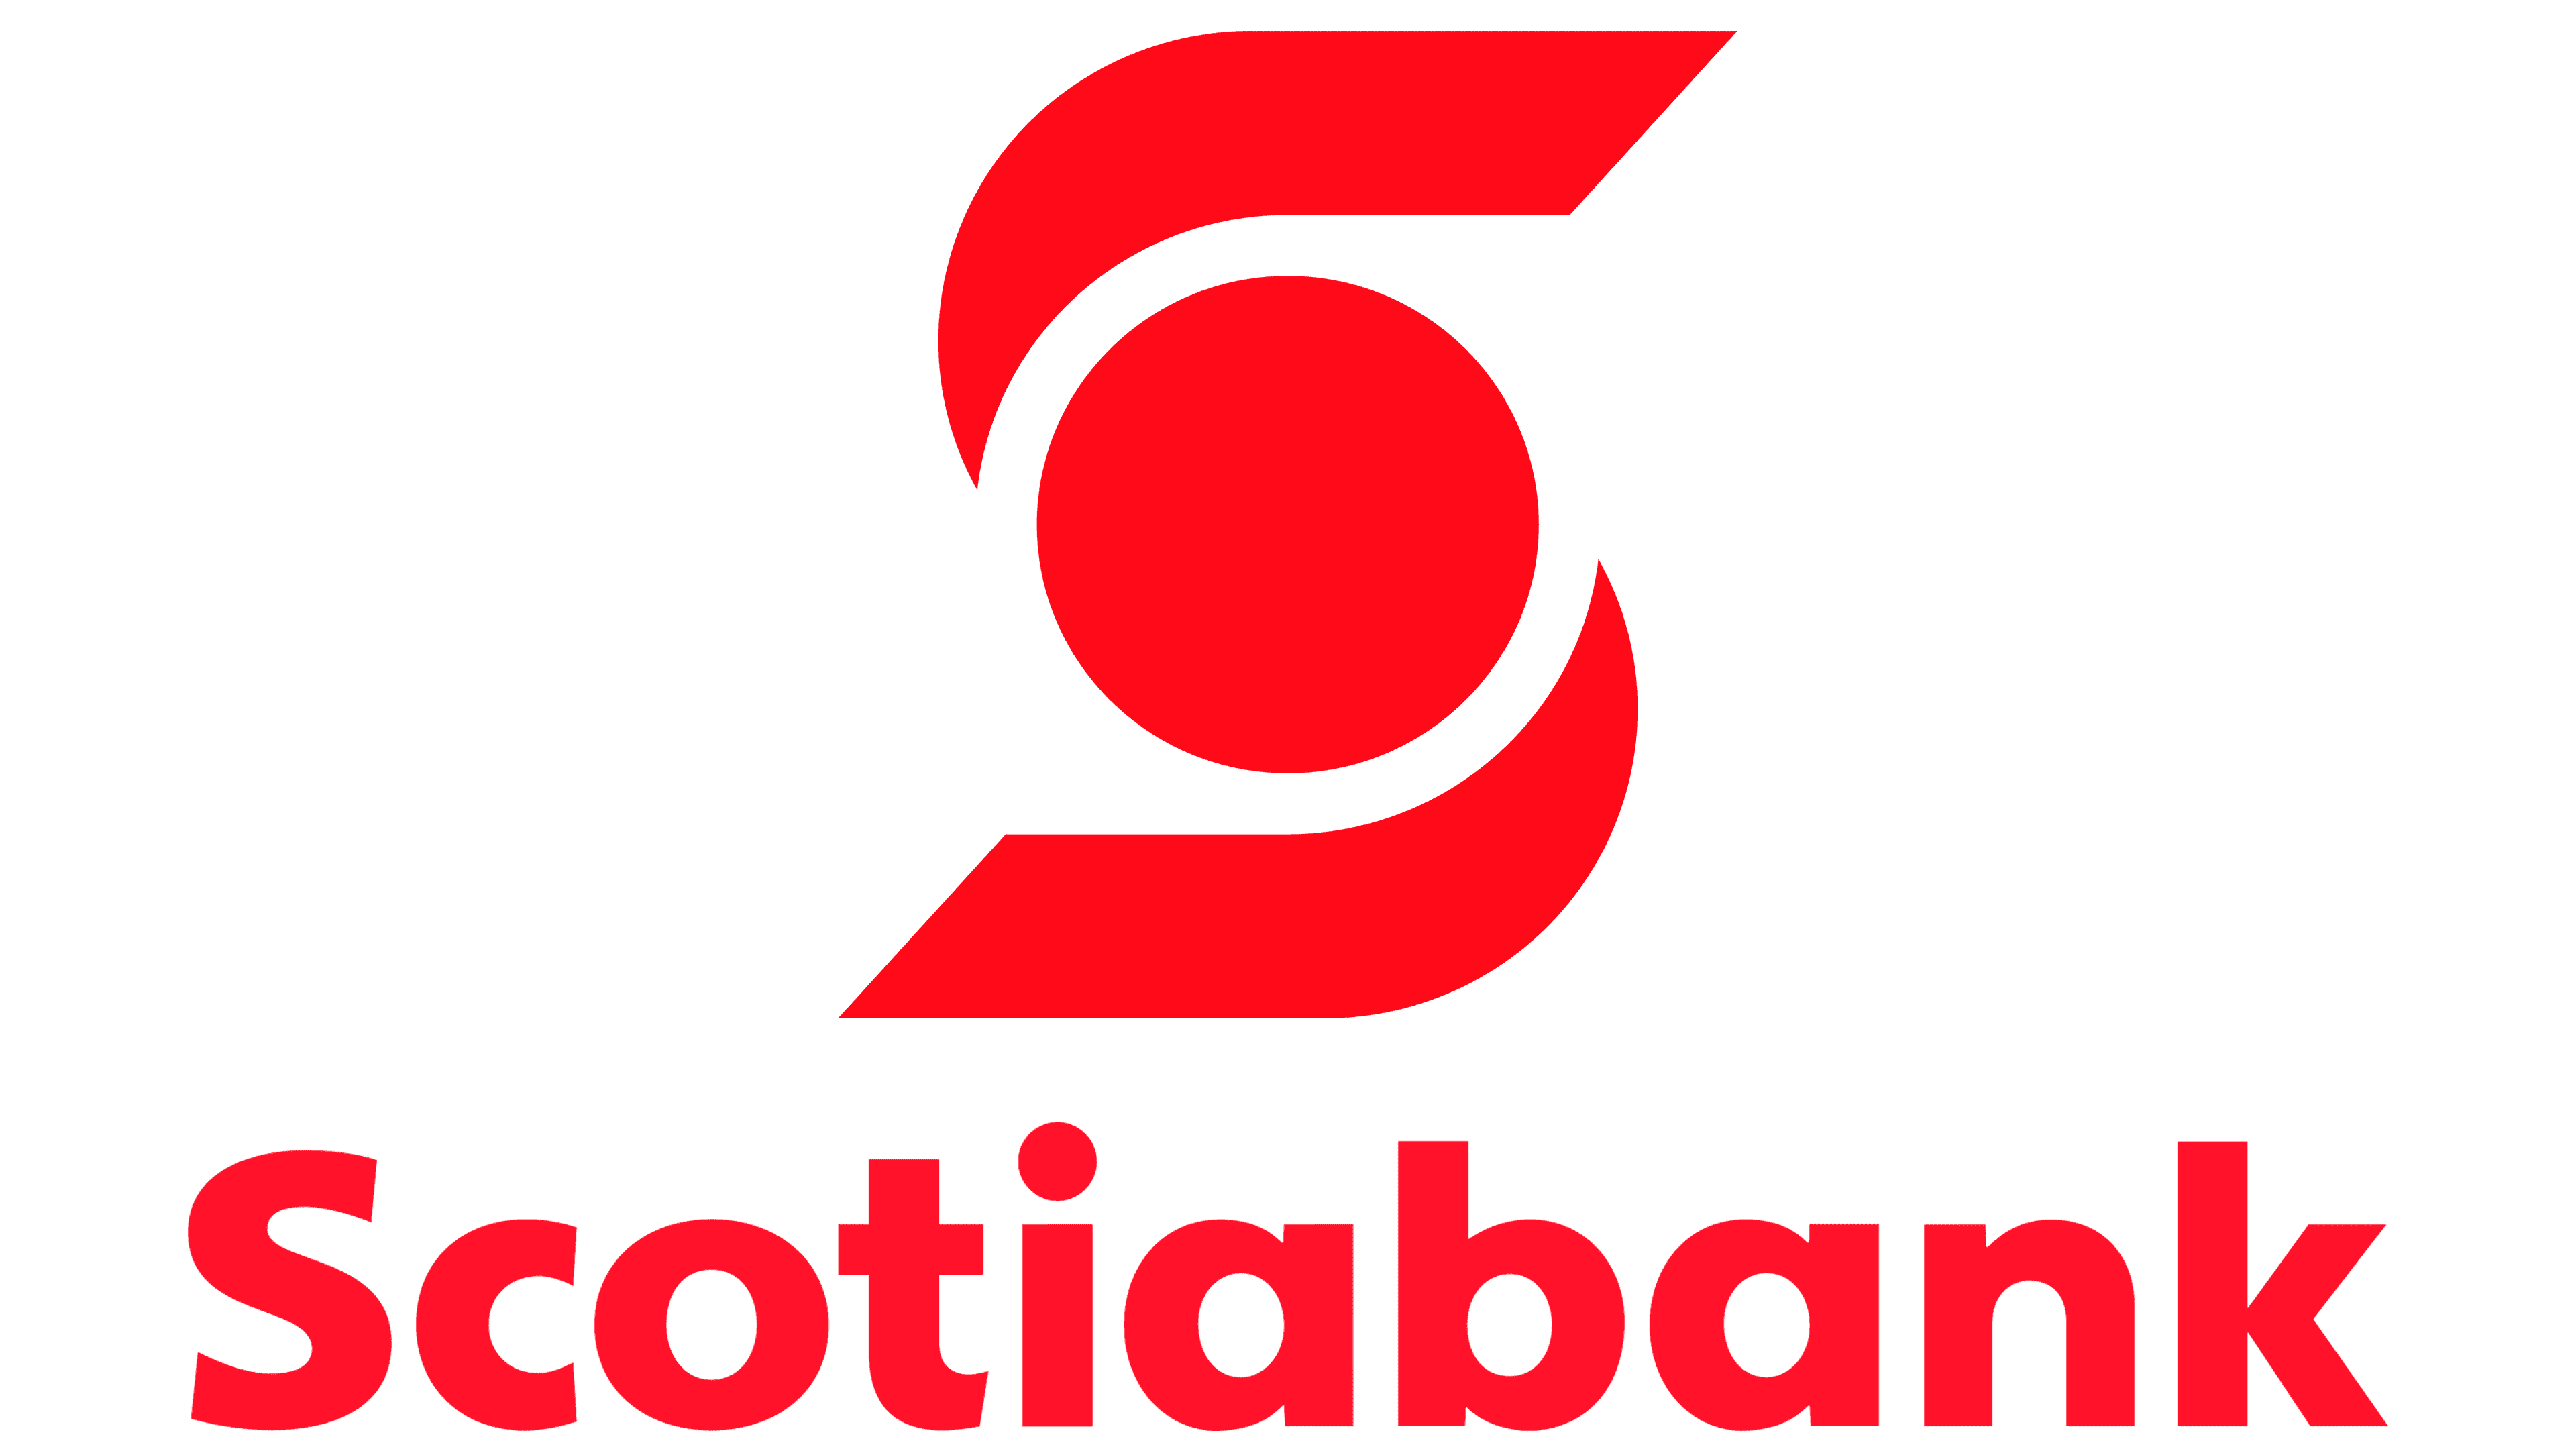 Scotiabank Preferred Package with Seniors’ Discount